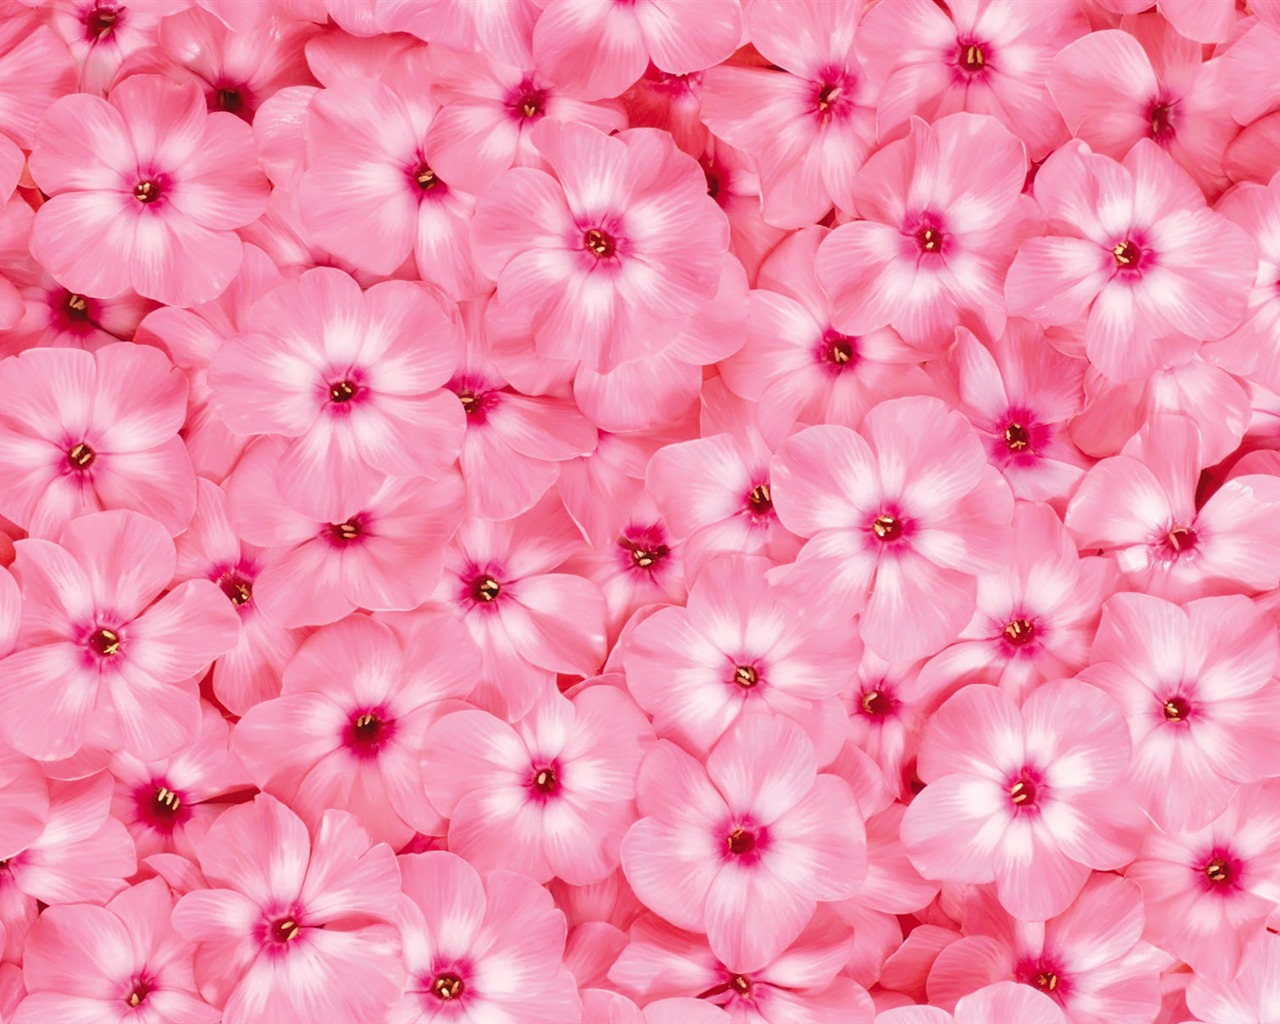 Surrounded by stunning flowers wallpaper #14 - 1280x1024